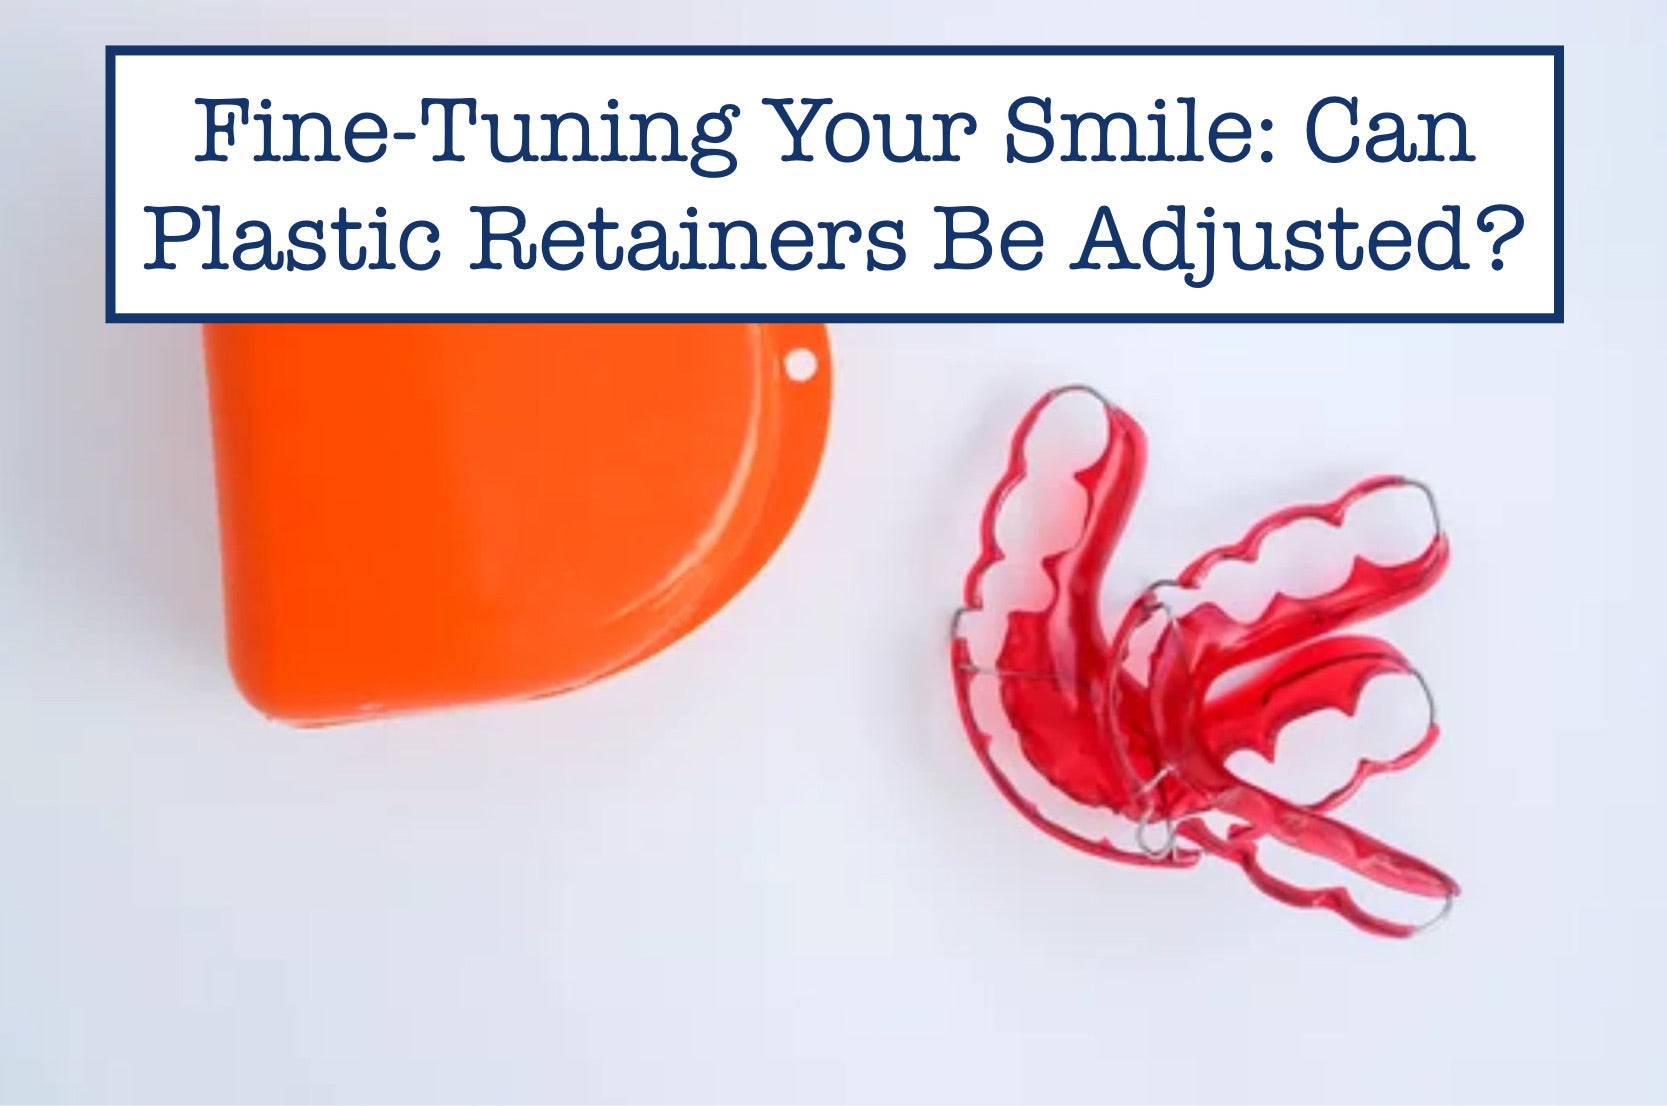 Fine-Tuning Your Smile: Can Plastic Retainers Be Adjusted?